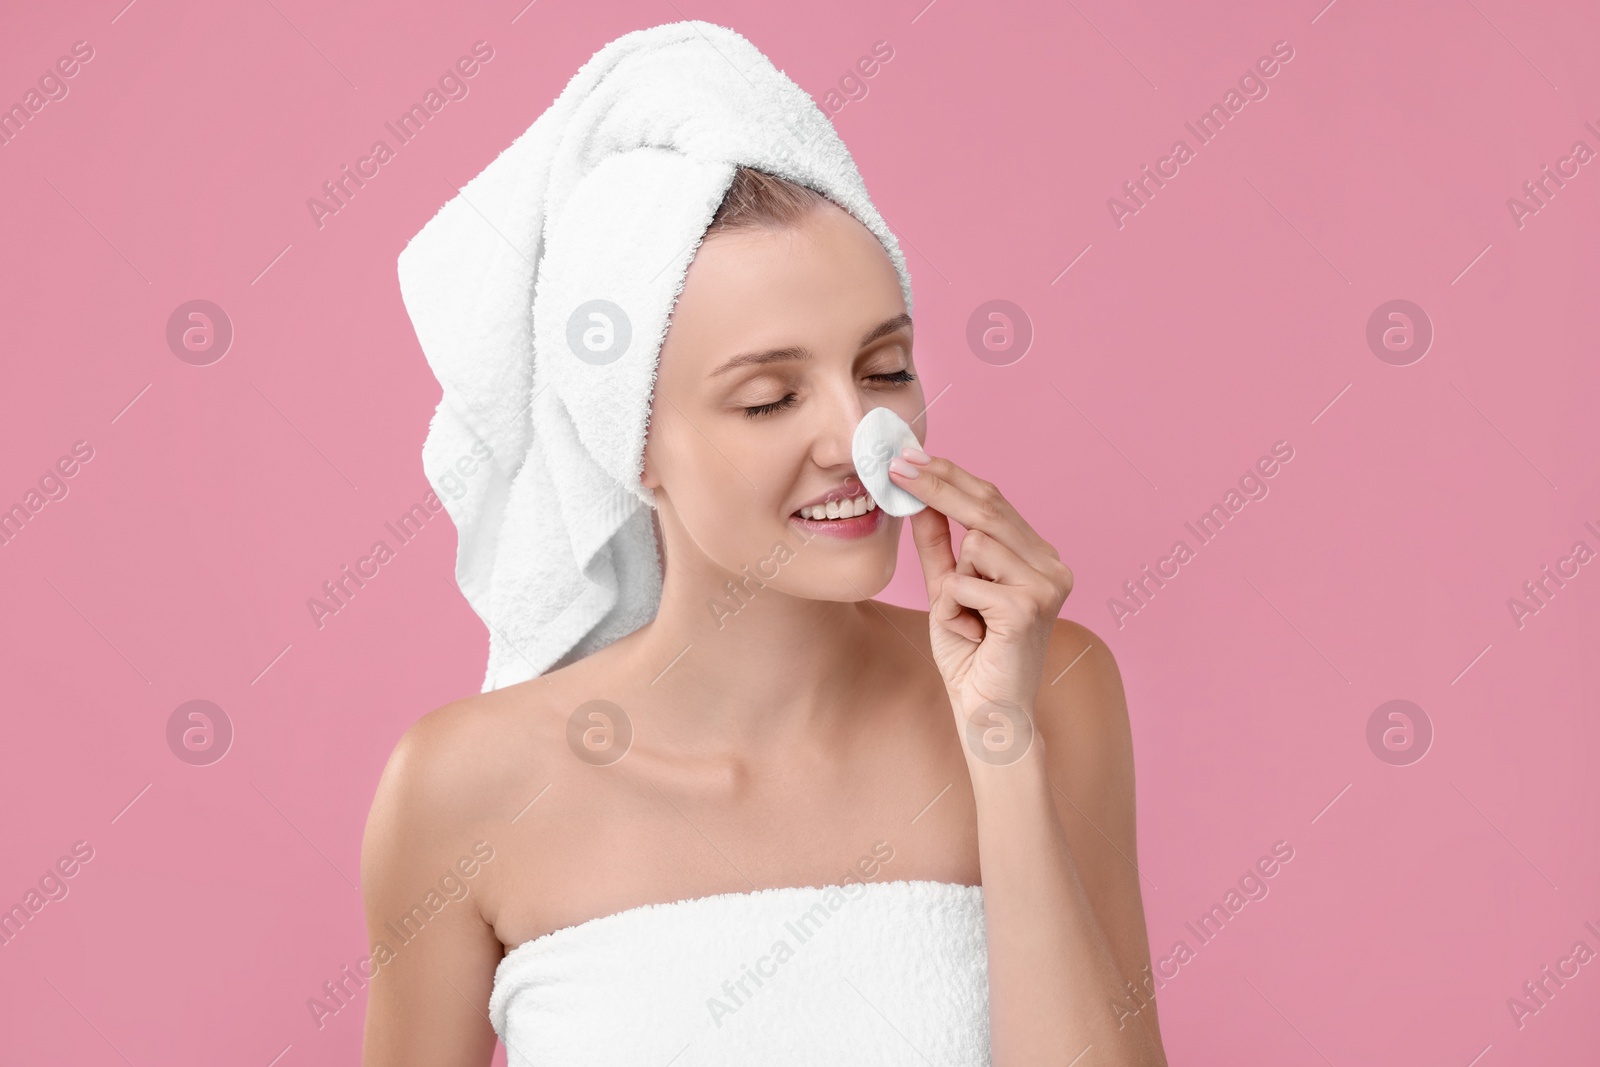 Photo of Young woman cleaning her face with cotton pad on pink background